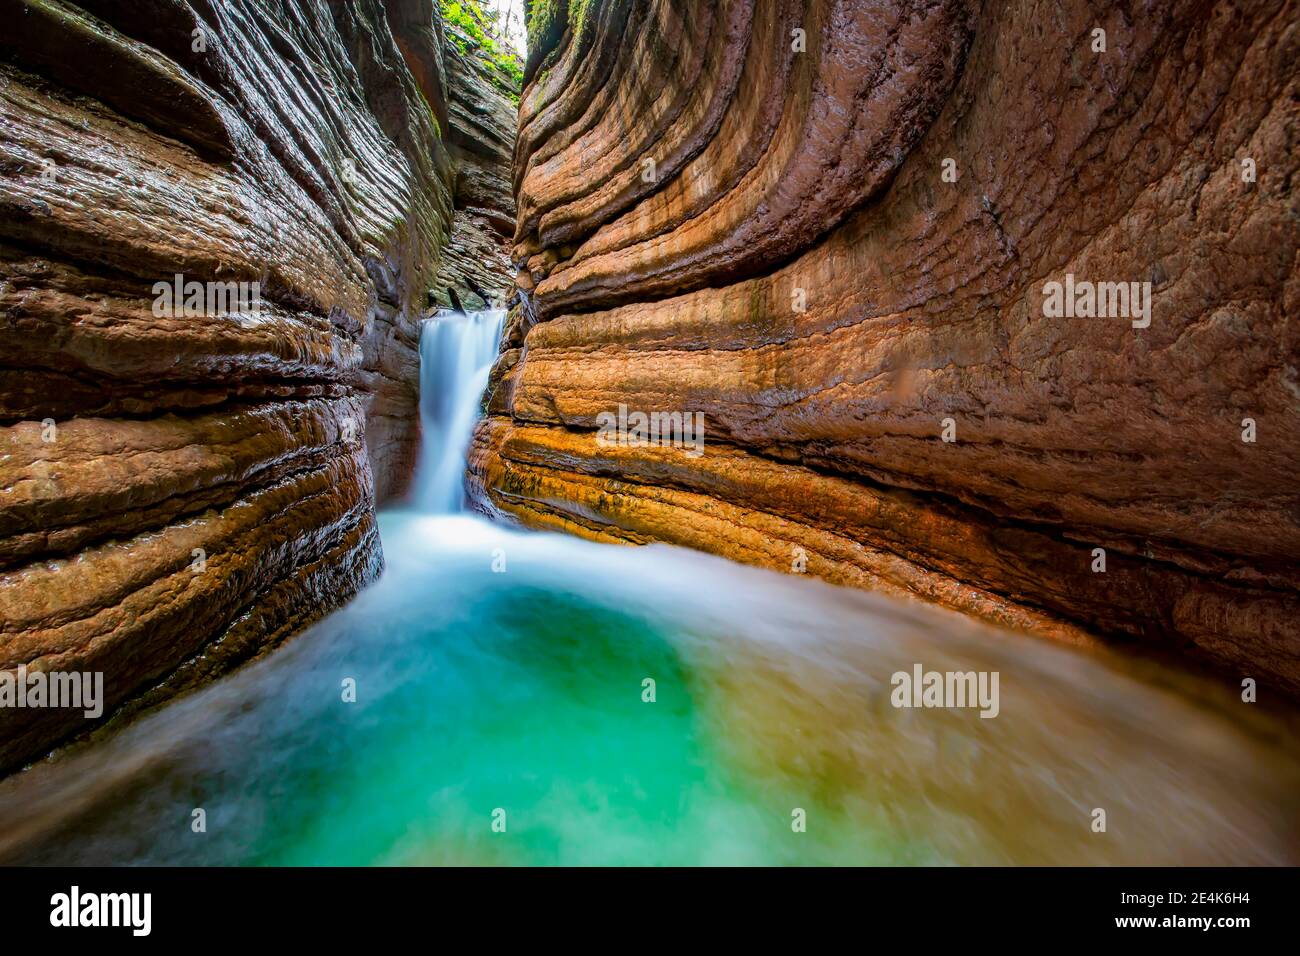 Long exposure of Taugl river flowing in Red Canyon, Austria Stock Photo